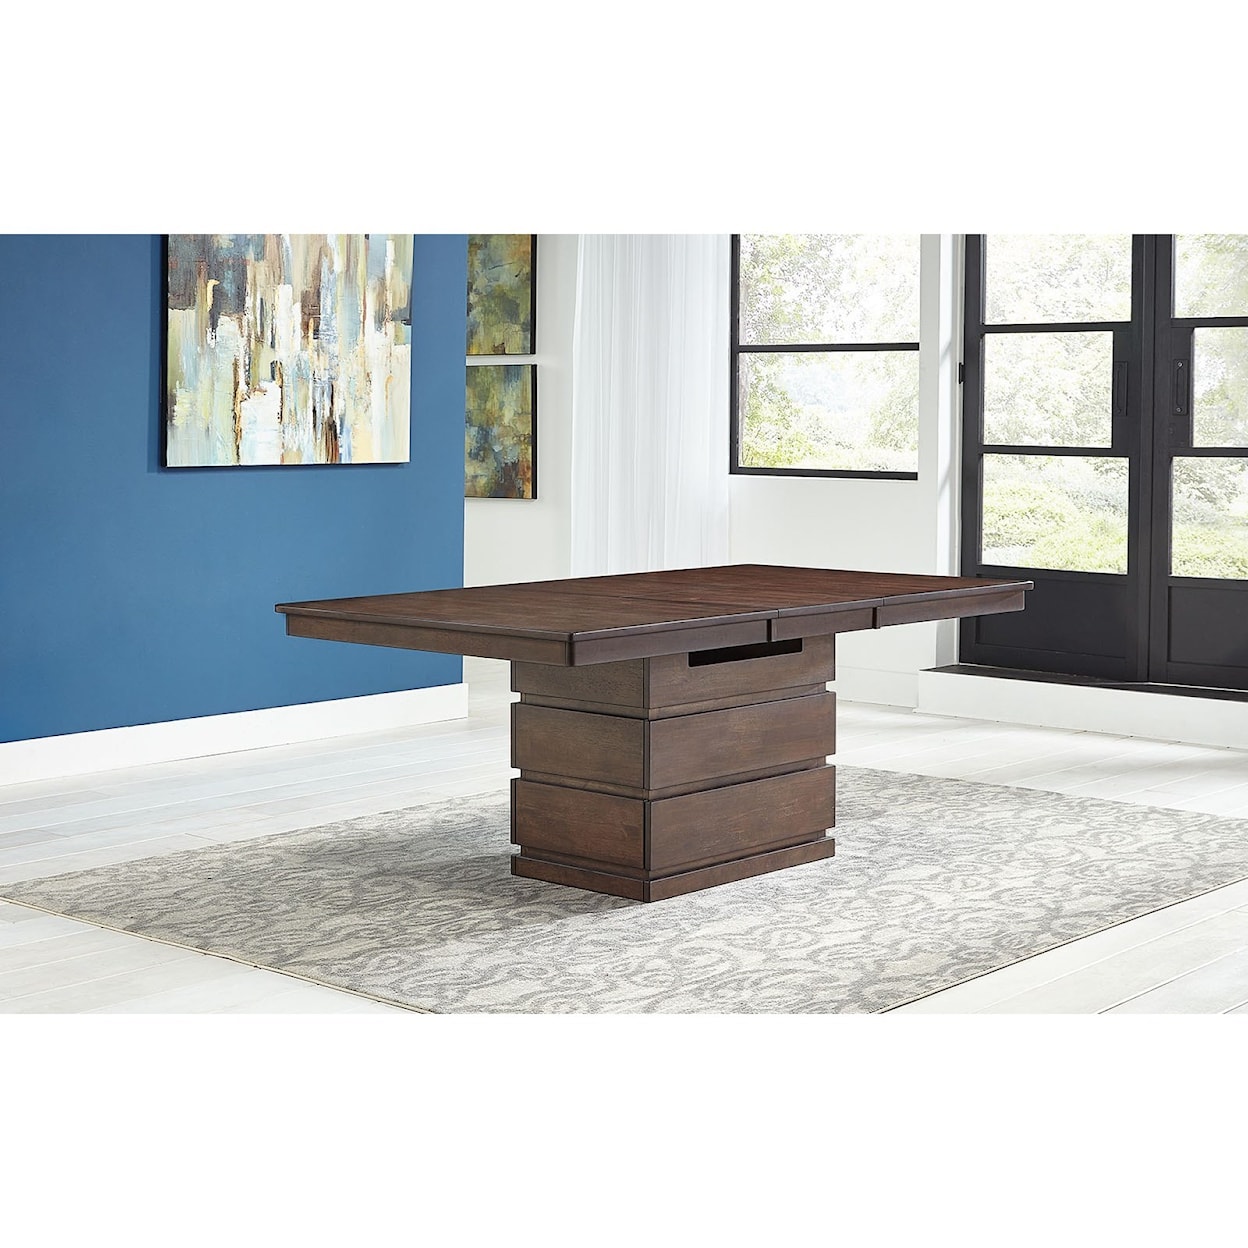 AAmerica Chesney Convertible Height Storage Table